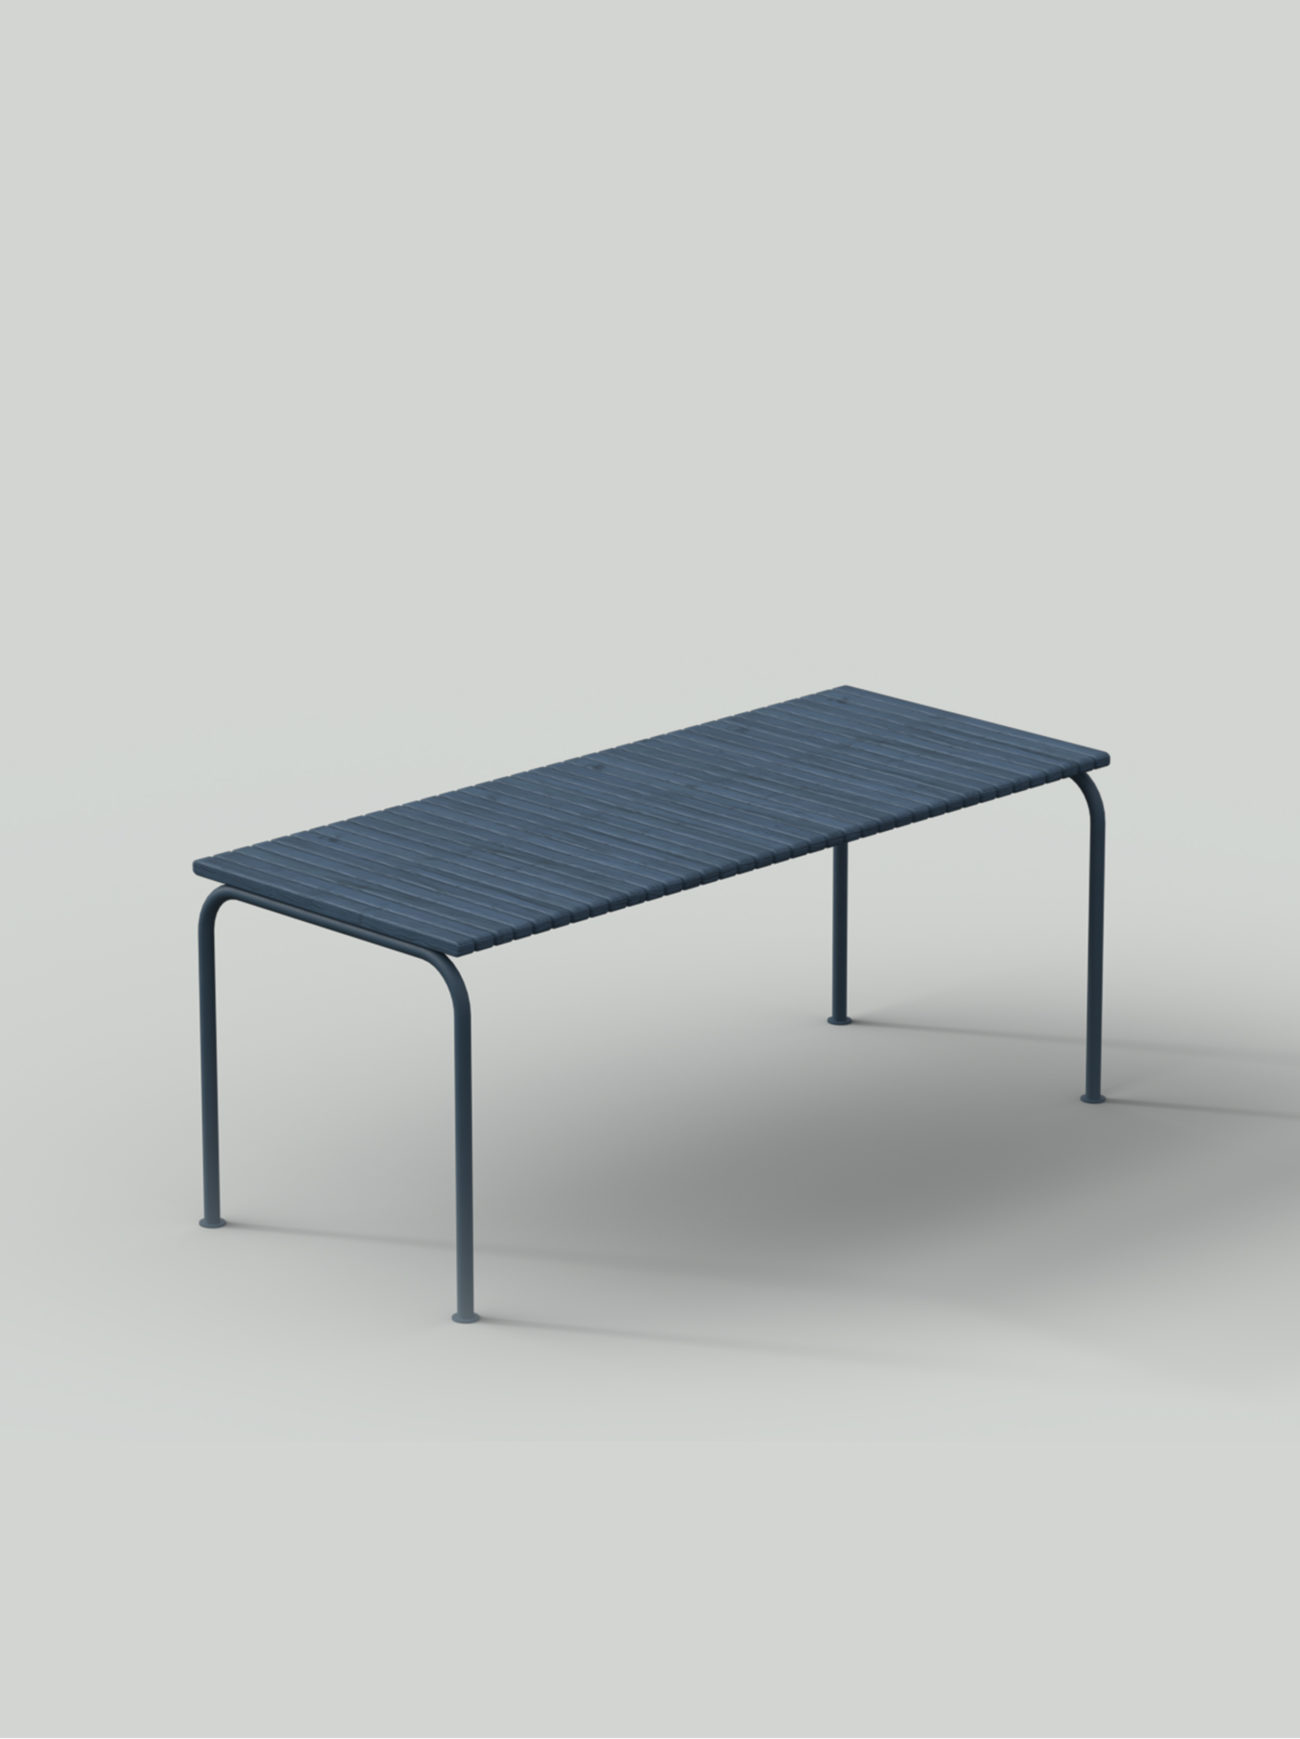 Blue table with steel frame and wood planks